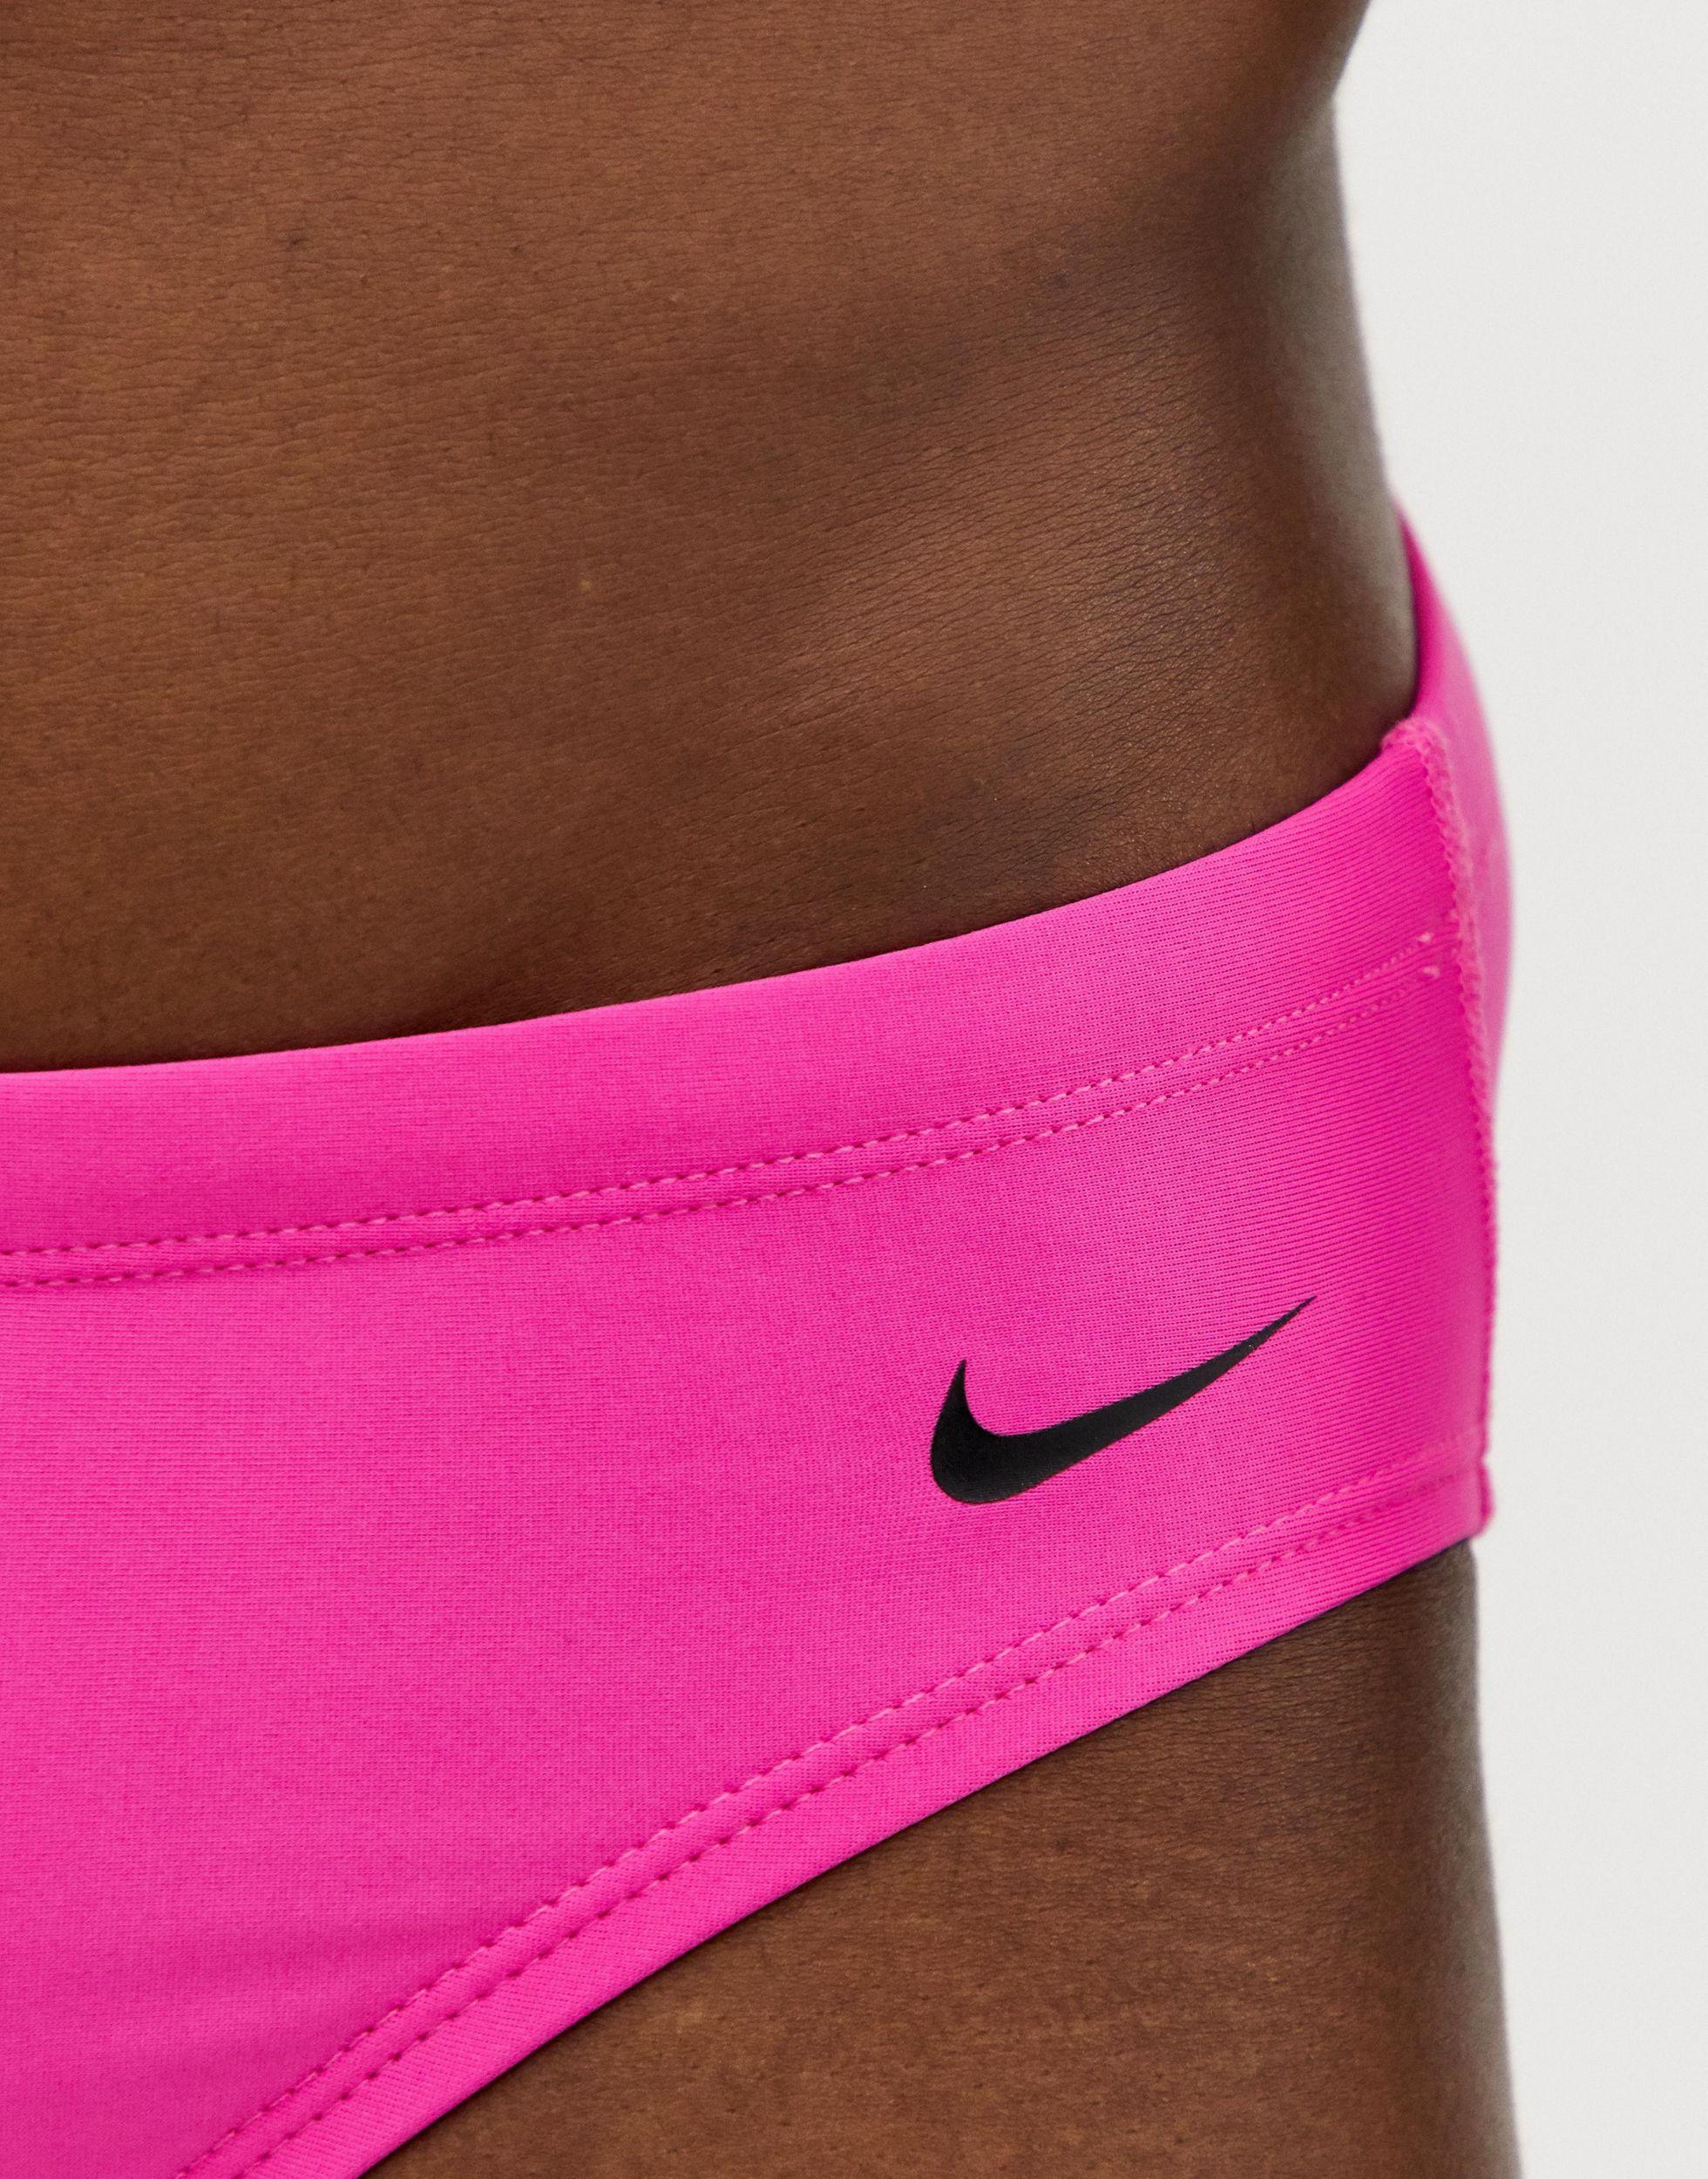 Nike Synthetic Exclusive Big Swoosh Trunks in Pink for Men - Lyst